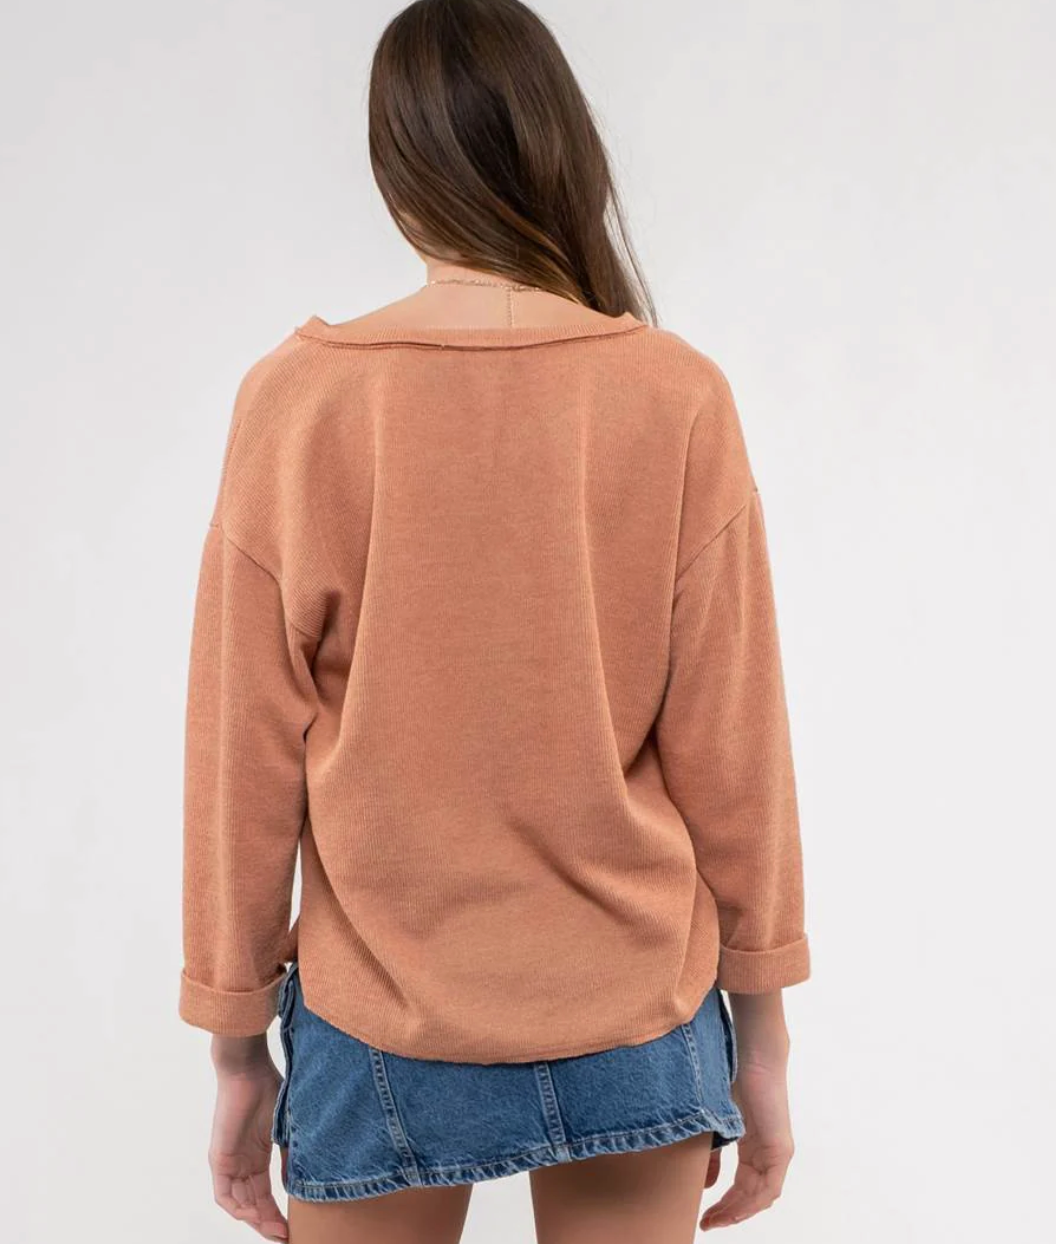 The Apricot Top (S-L)